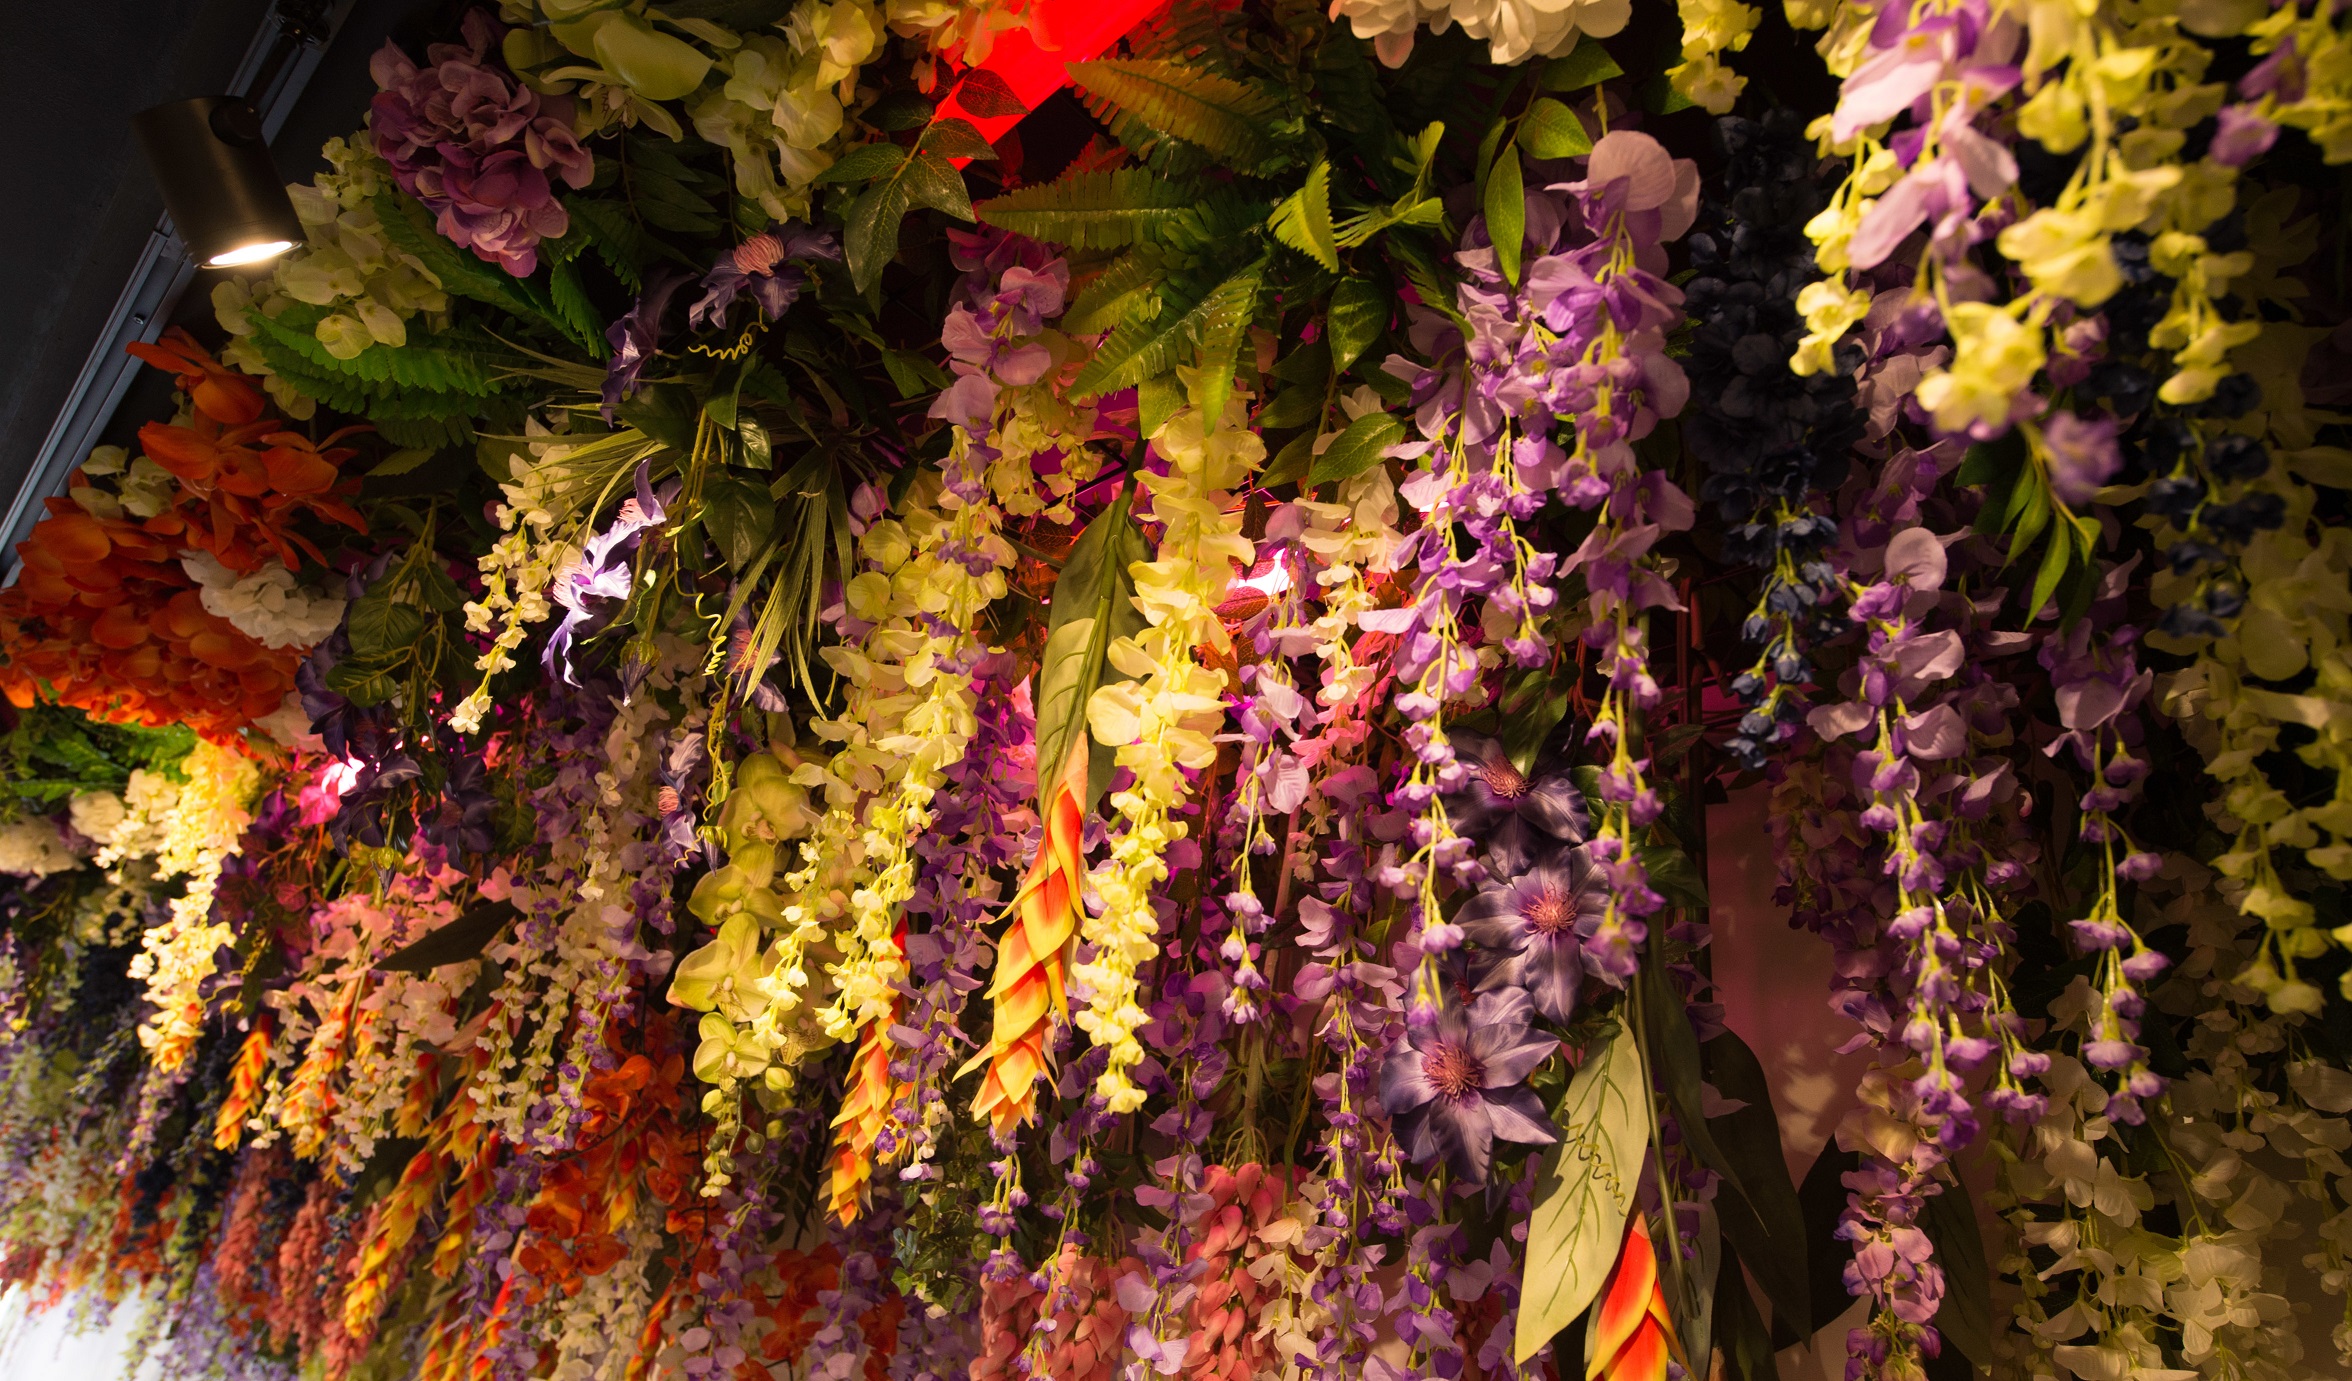 Hanging flowers adorn Diptyque's pop-up space